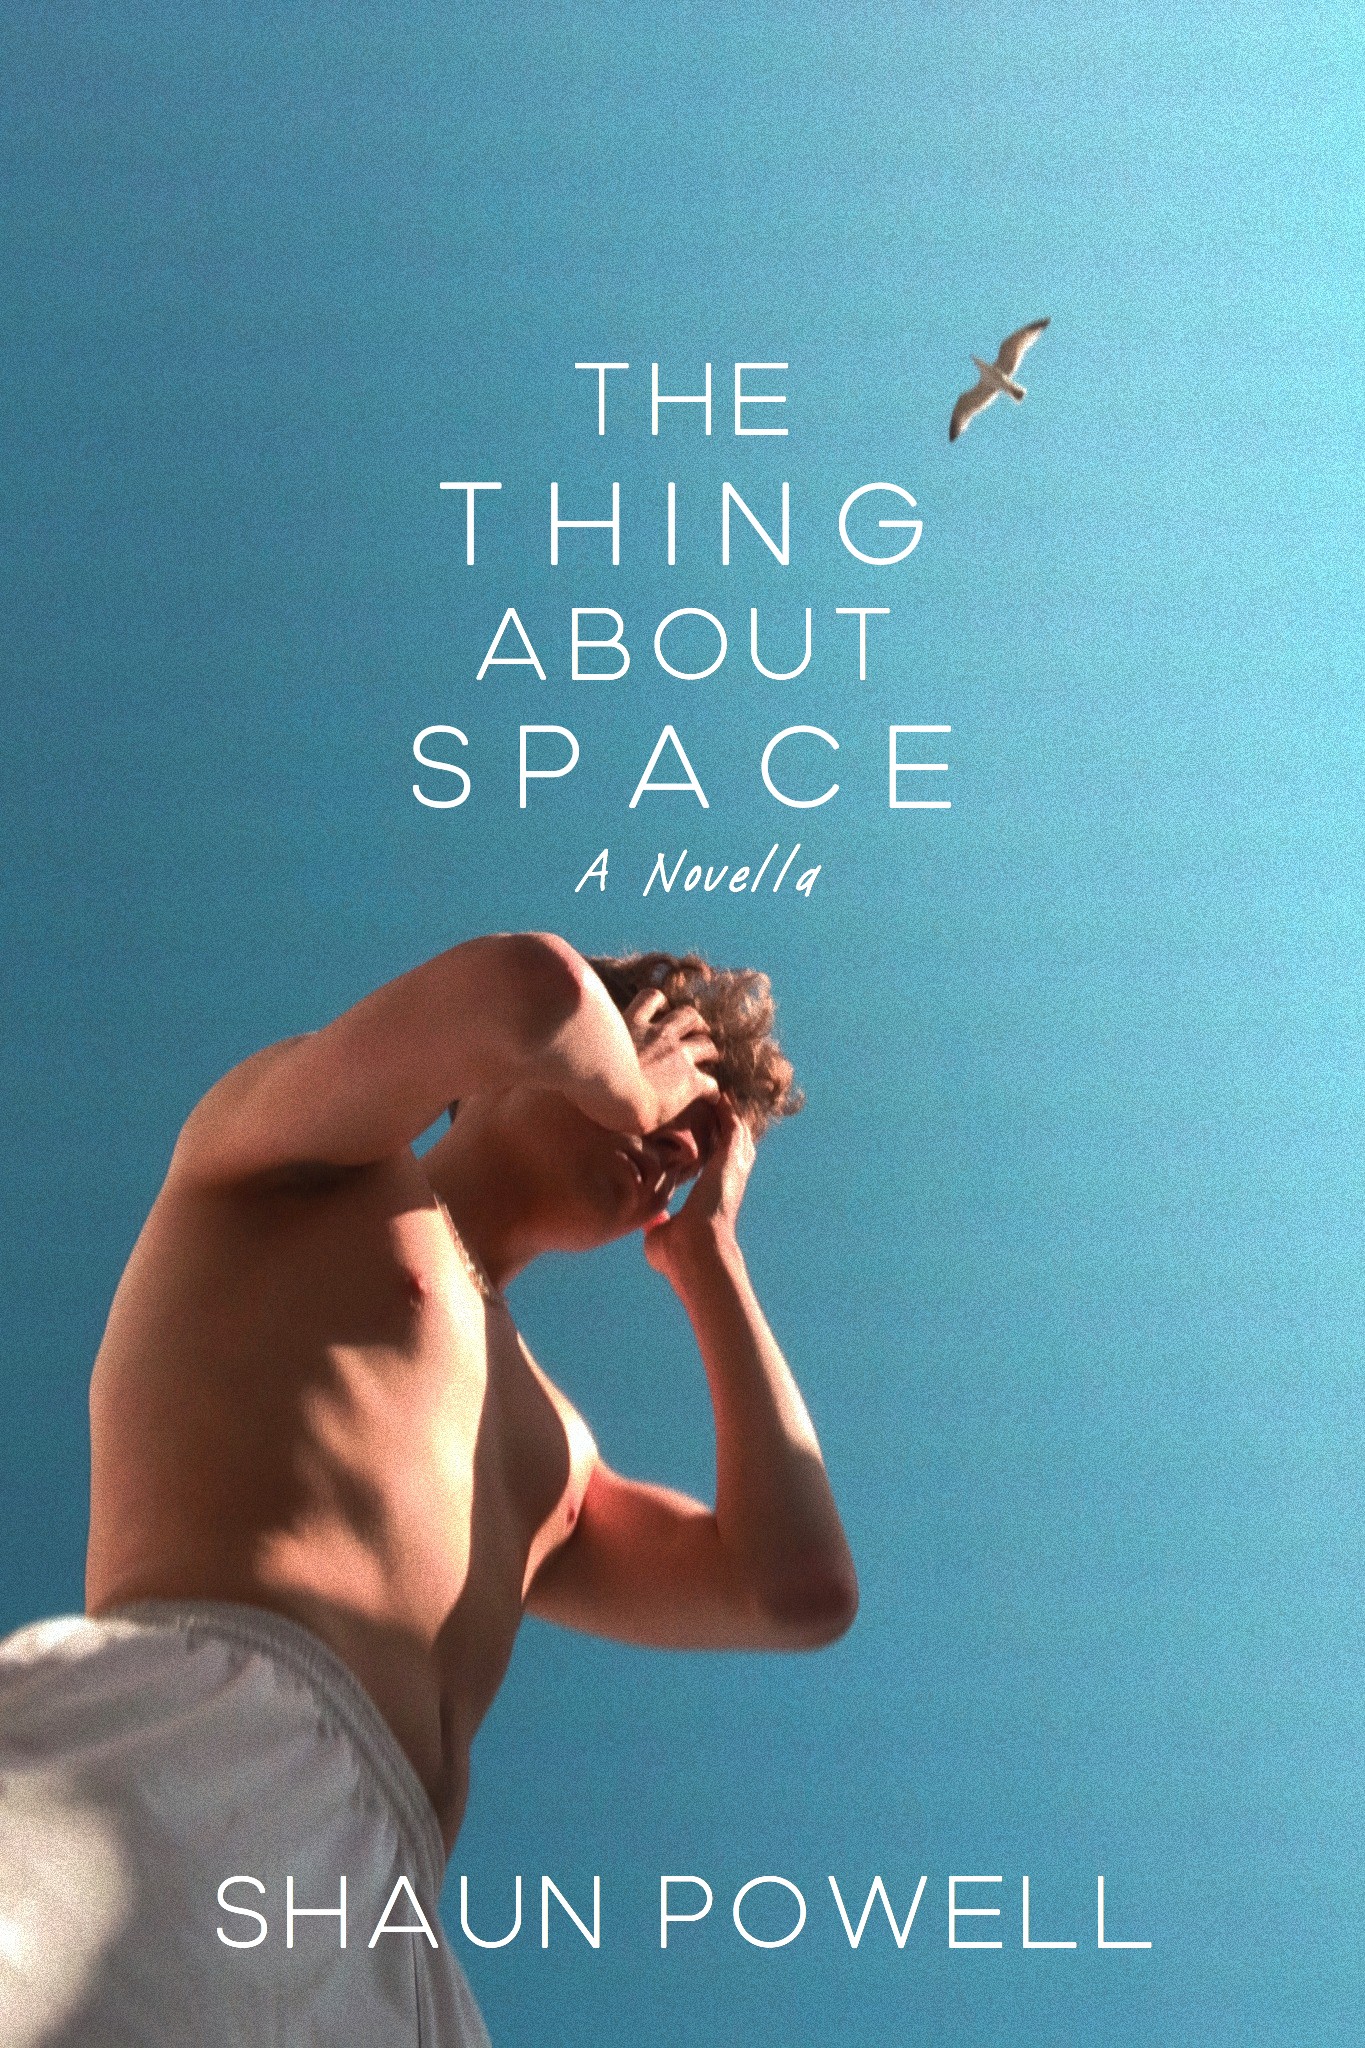 FREE: The Thing About Space by Shaun Powell